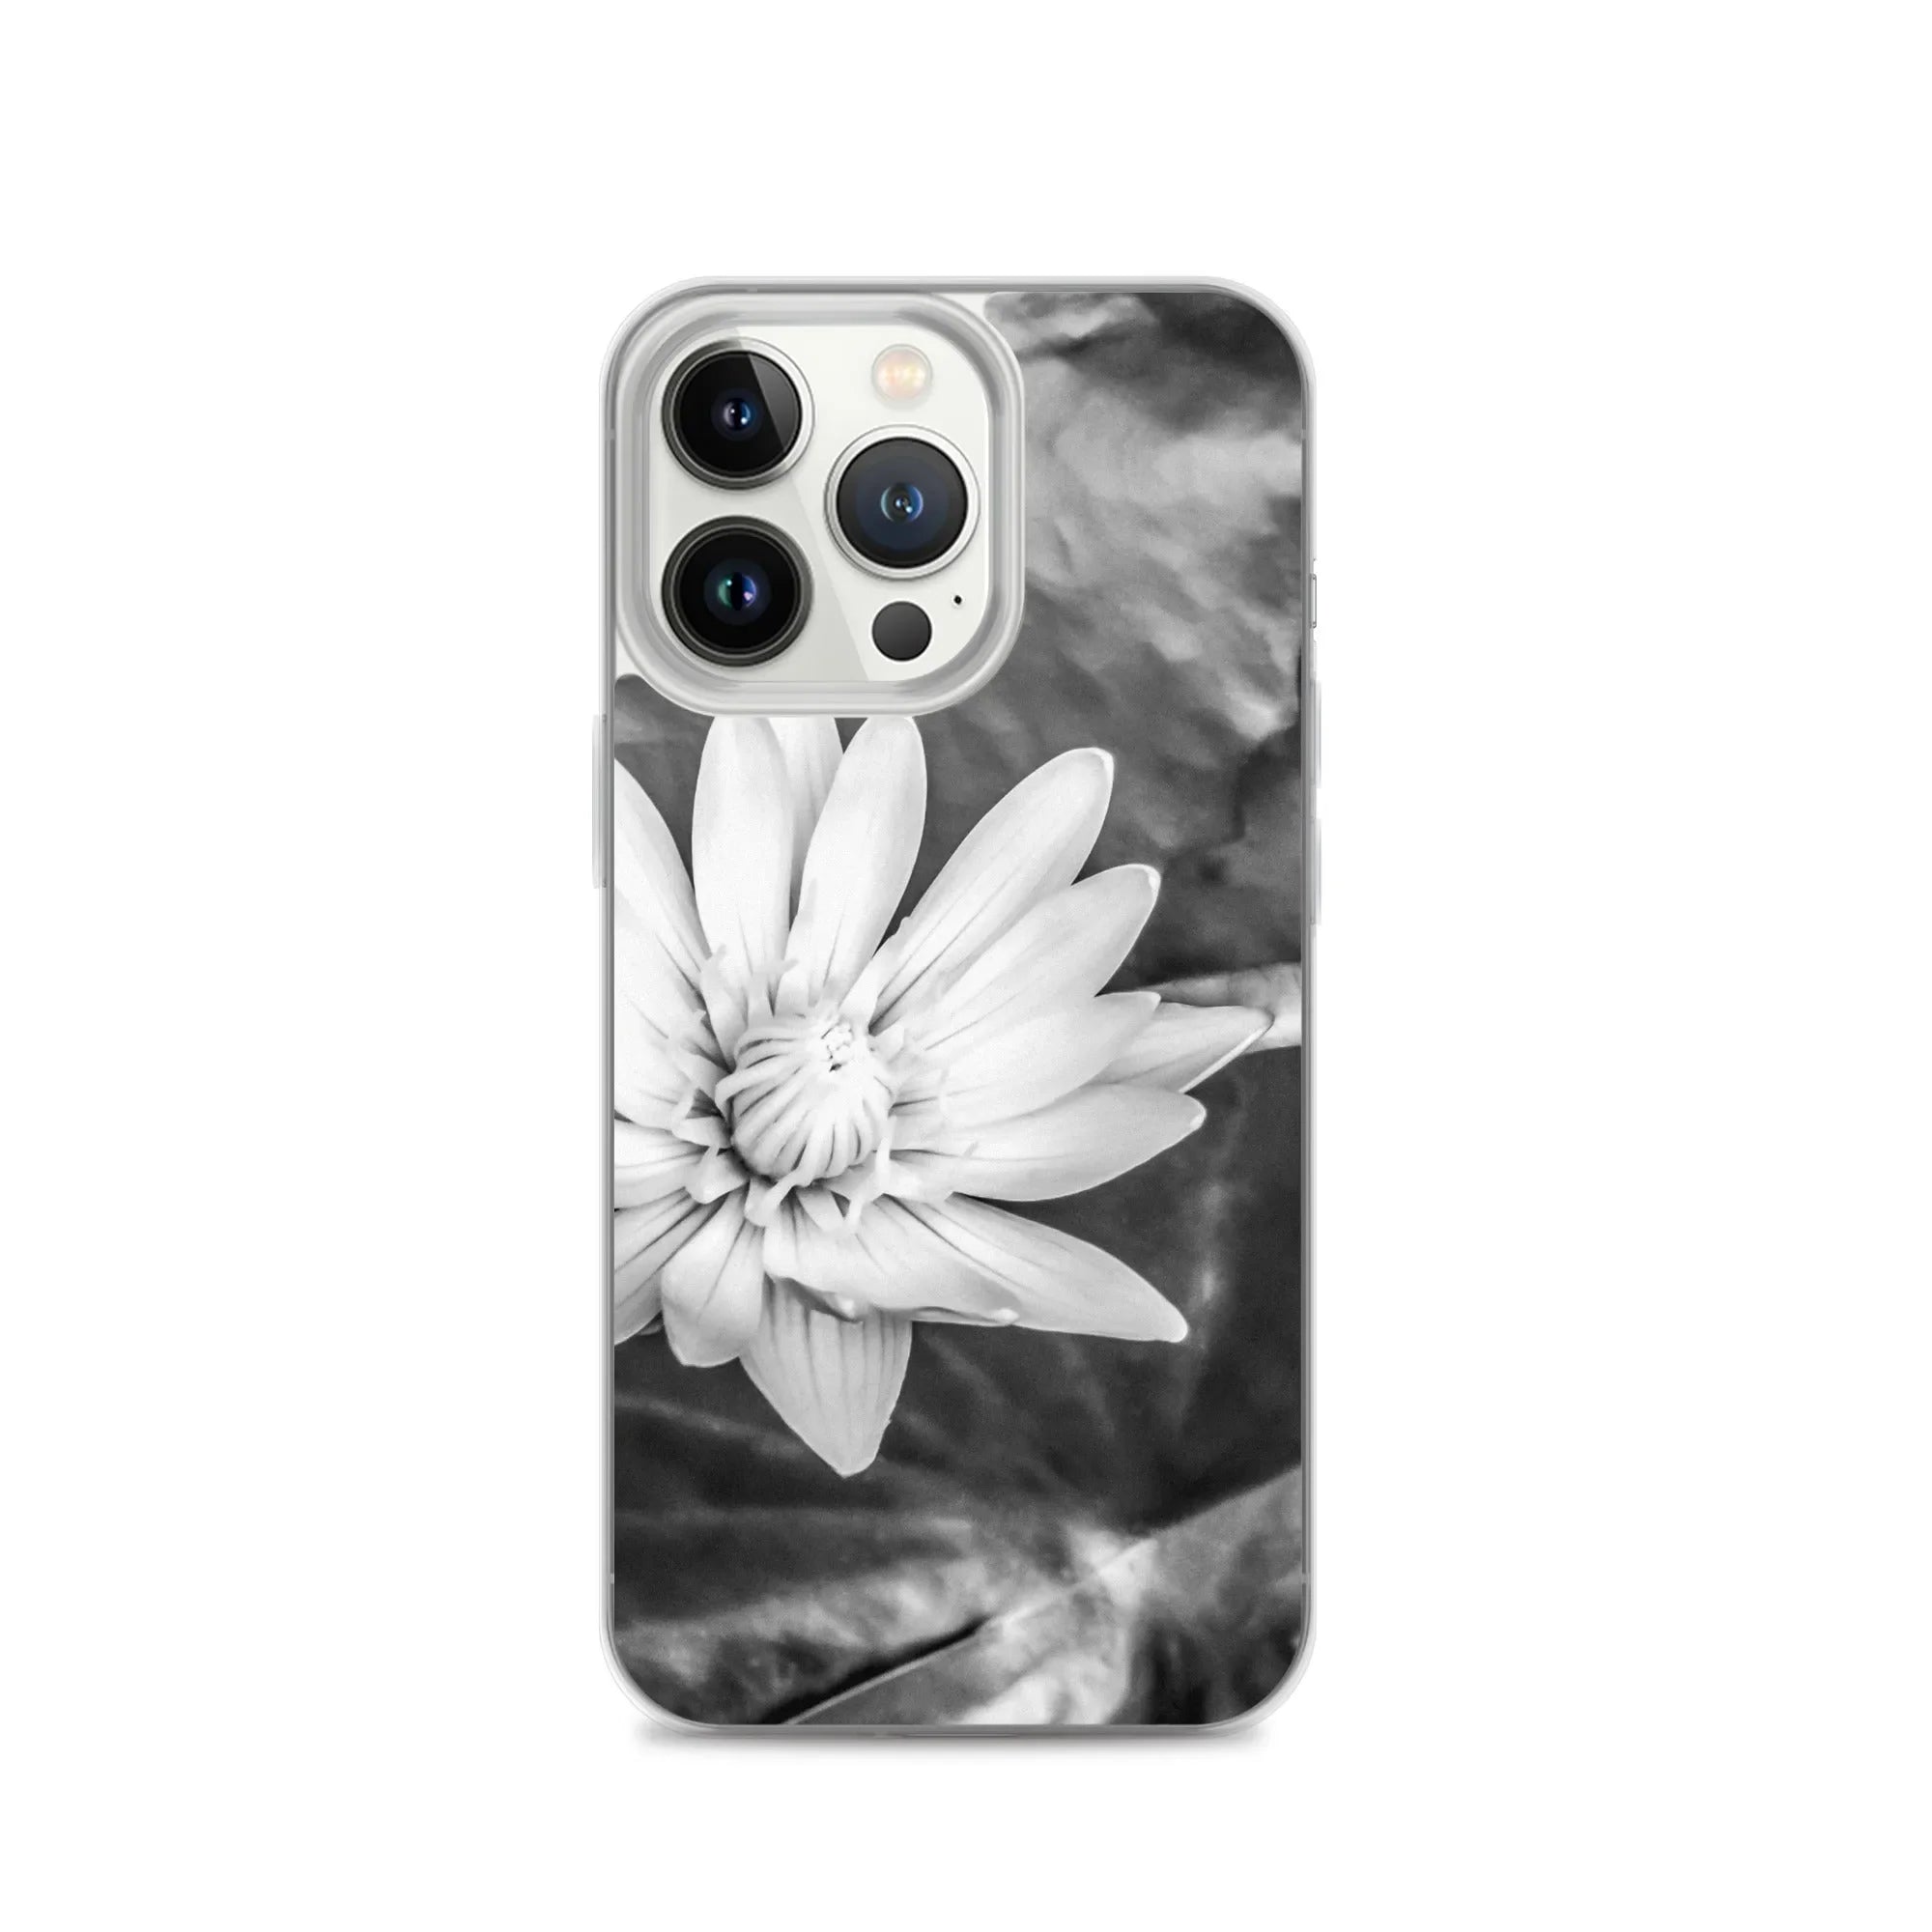 Breakthrough Floral Iphone Case - Black And White - Iphone 13 Pro - Mobile Phone Cases - Aesthetic Art